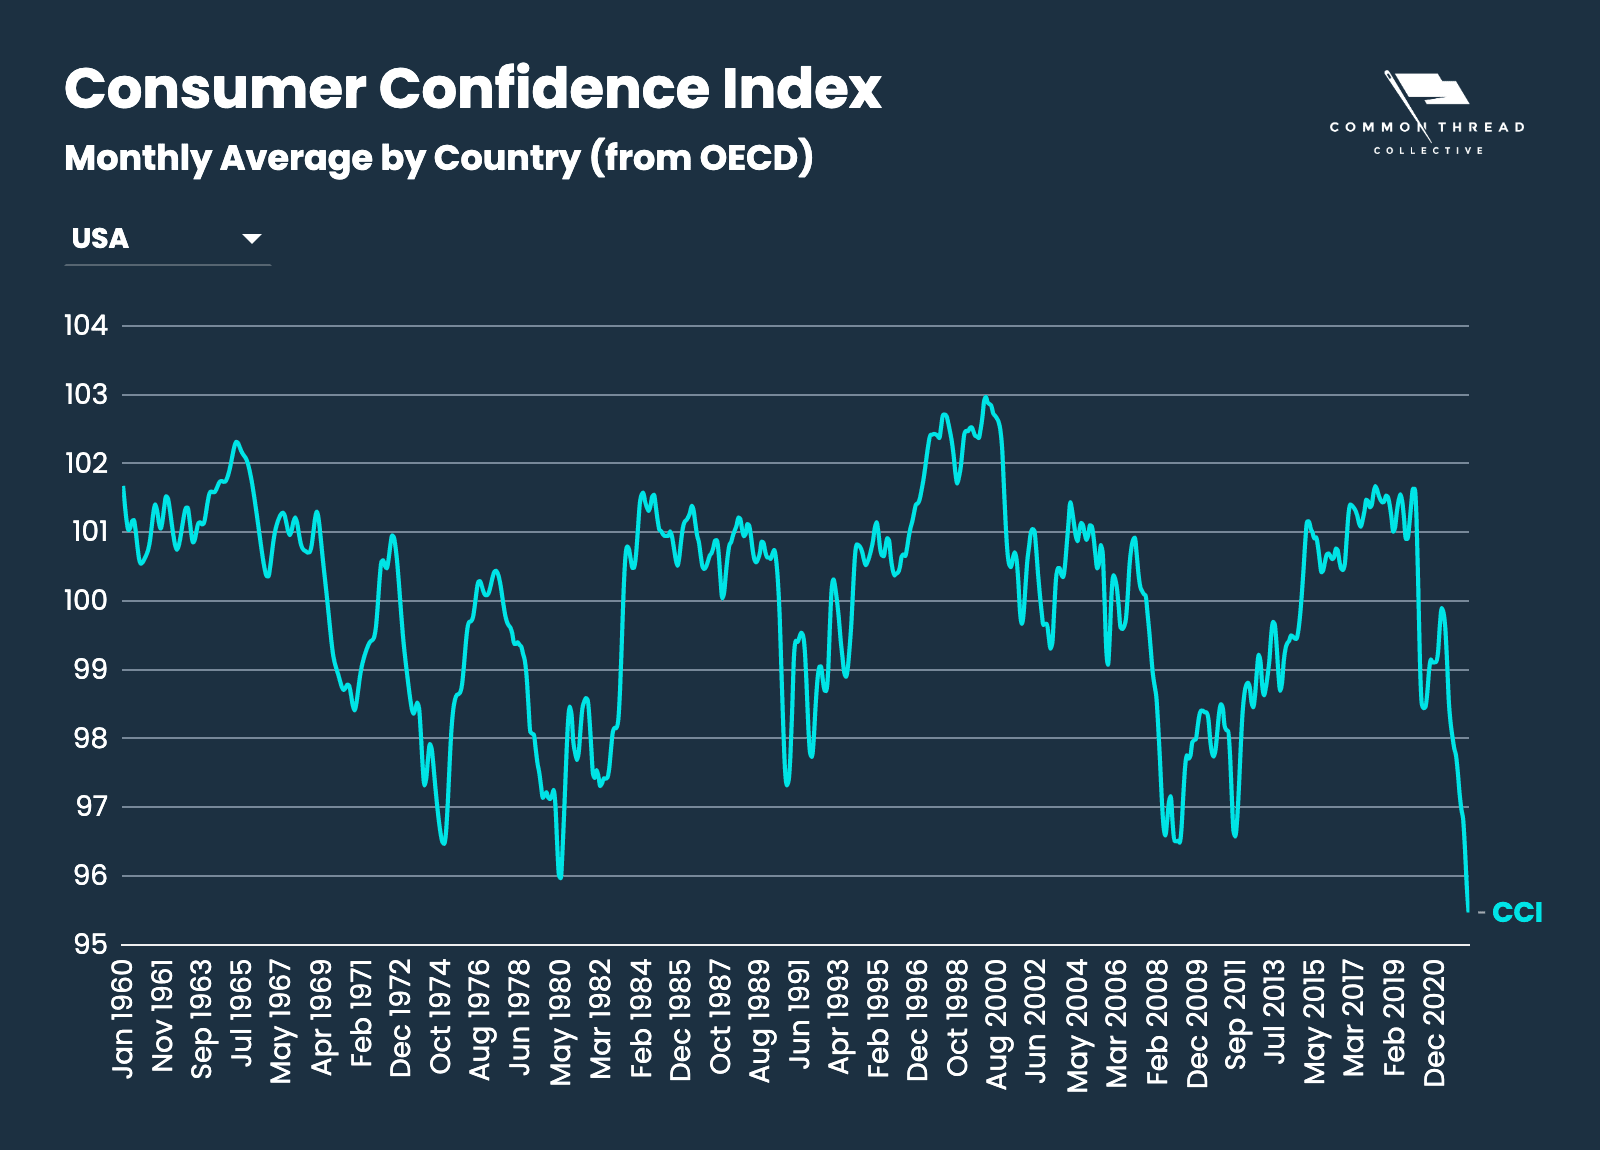 Consumer Confidence Index: Monthly Average by Country from OECD (featuring USA data)